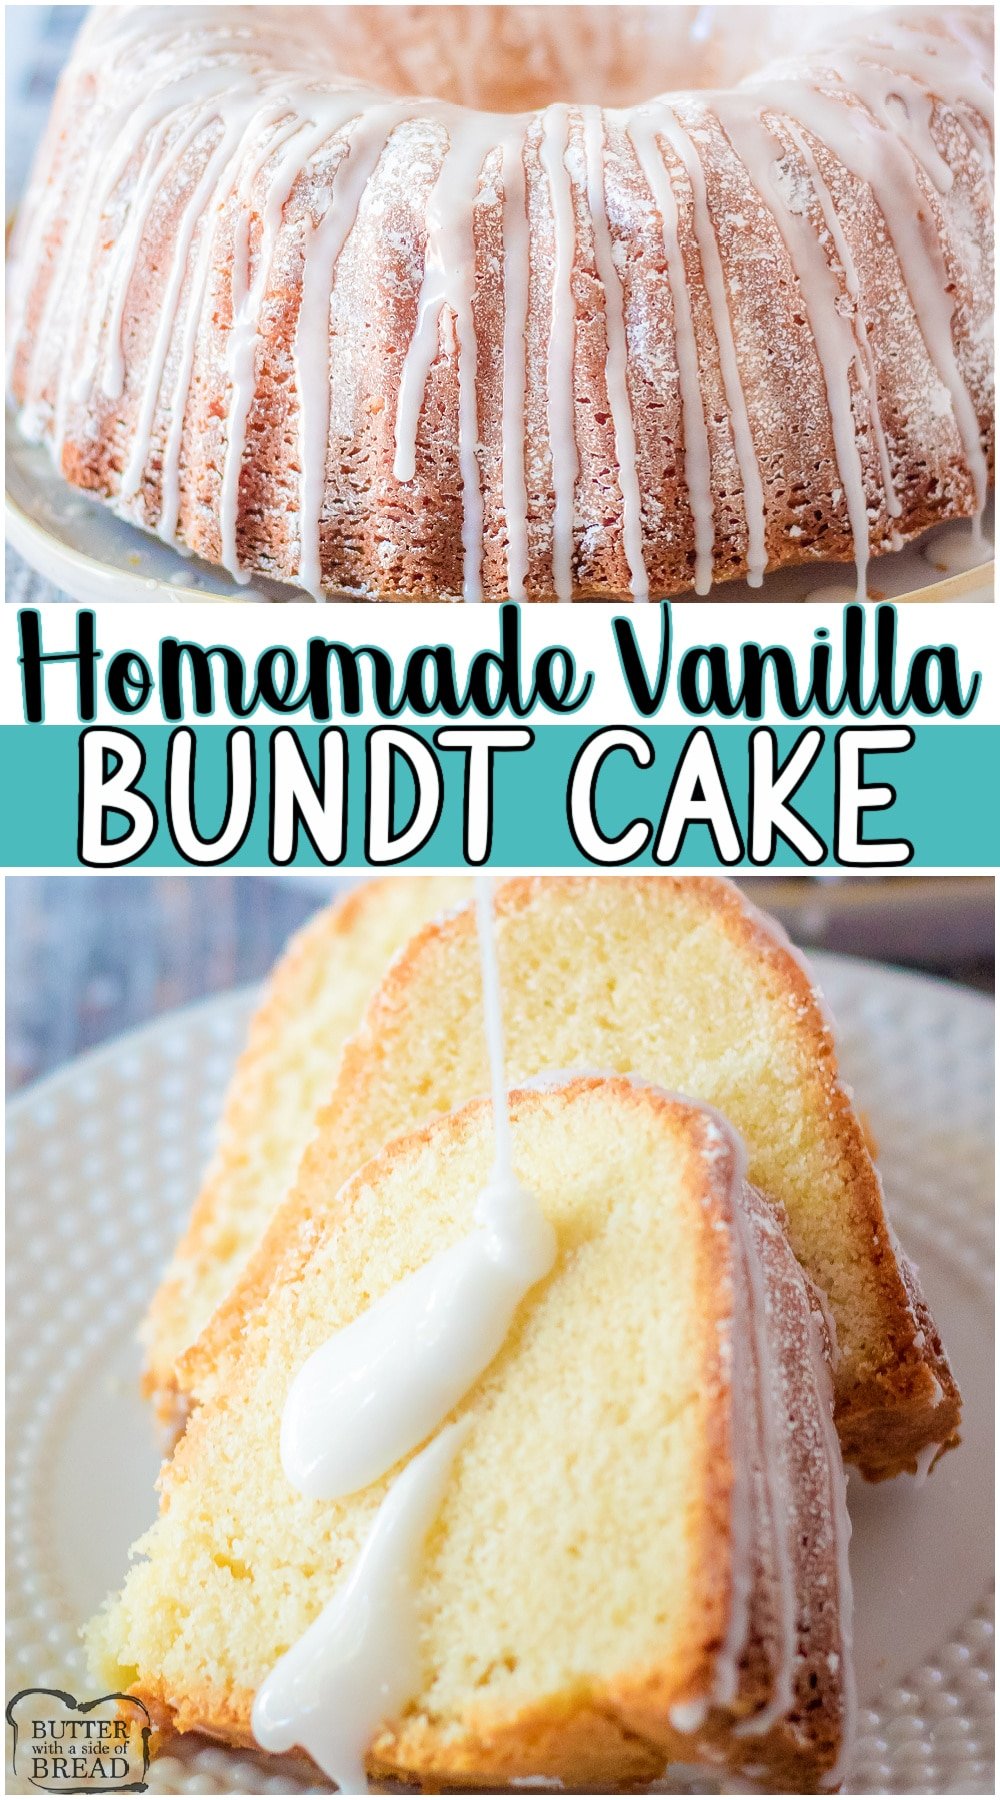 Lovely Vanilla Bundt Cake made with classic ingredients with fantastic vanilla flavor! Simple, classic bundt cake recipe that allows the vanilla flavors to shine beautifully! #cake #vanilla #bundt #baking #dessert #easyrecipe from BUTTER WITH A SIDE OF BREAD